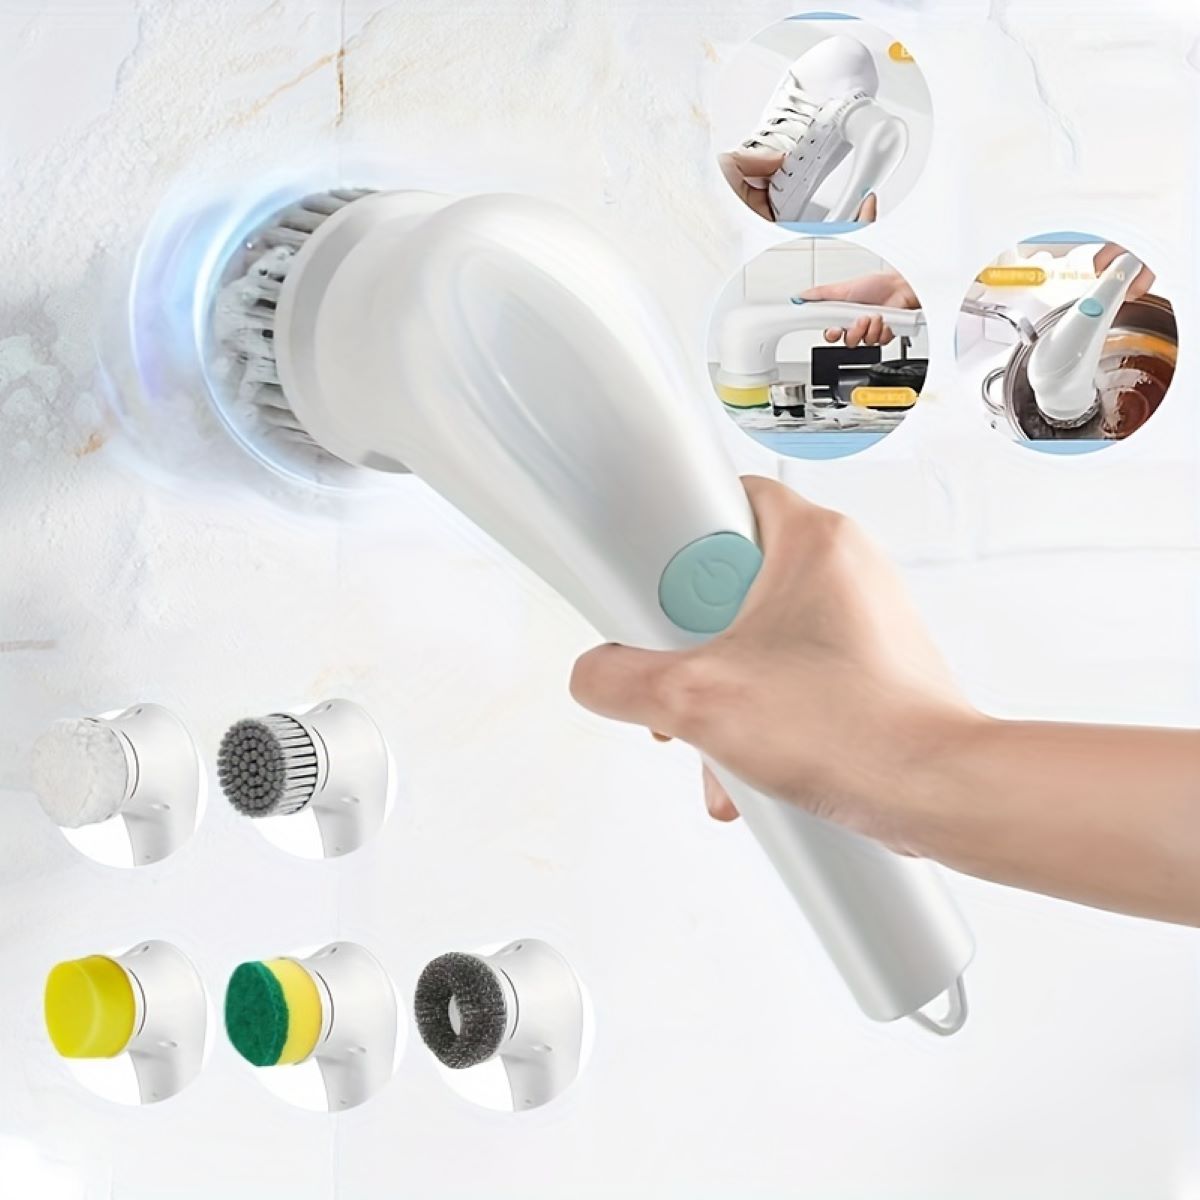 5-in-1 Magic Auto Scrubber | Rechargeable